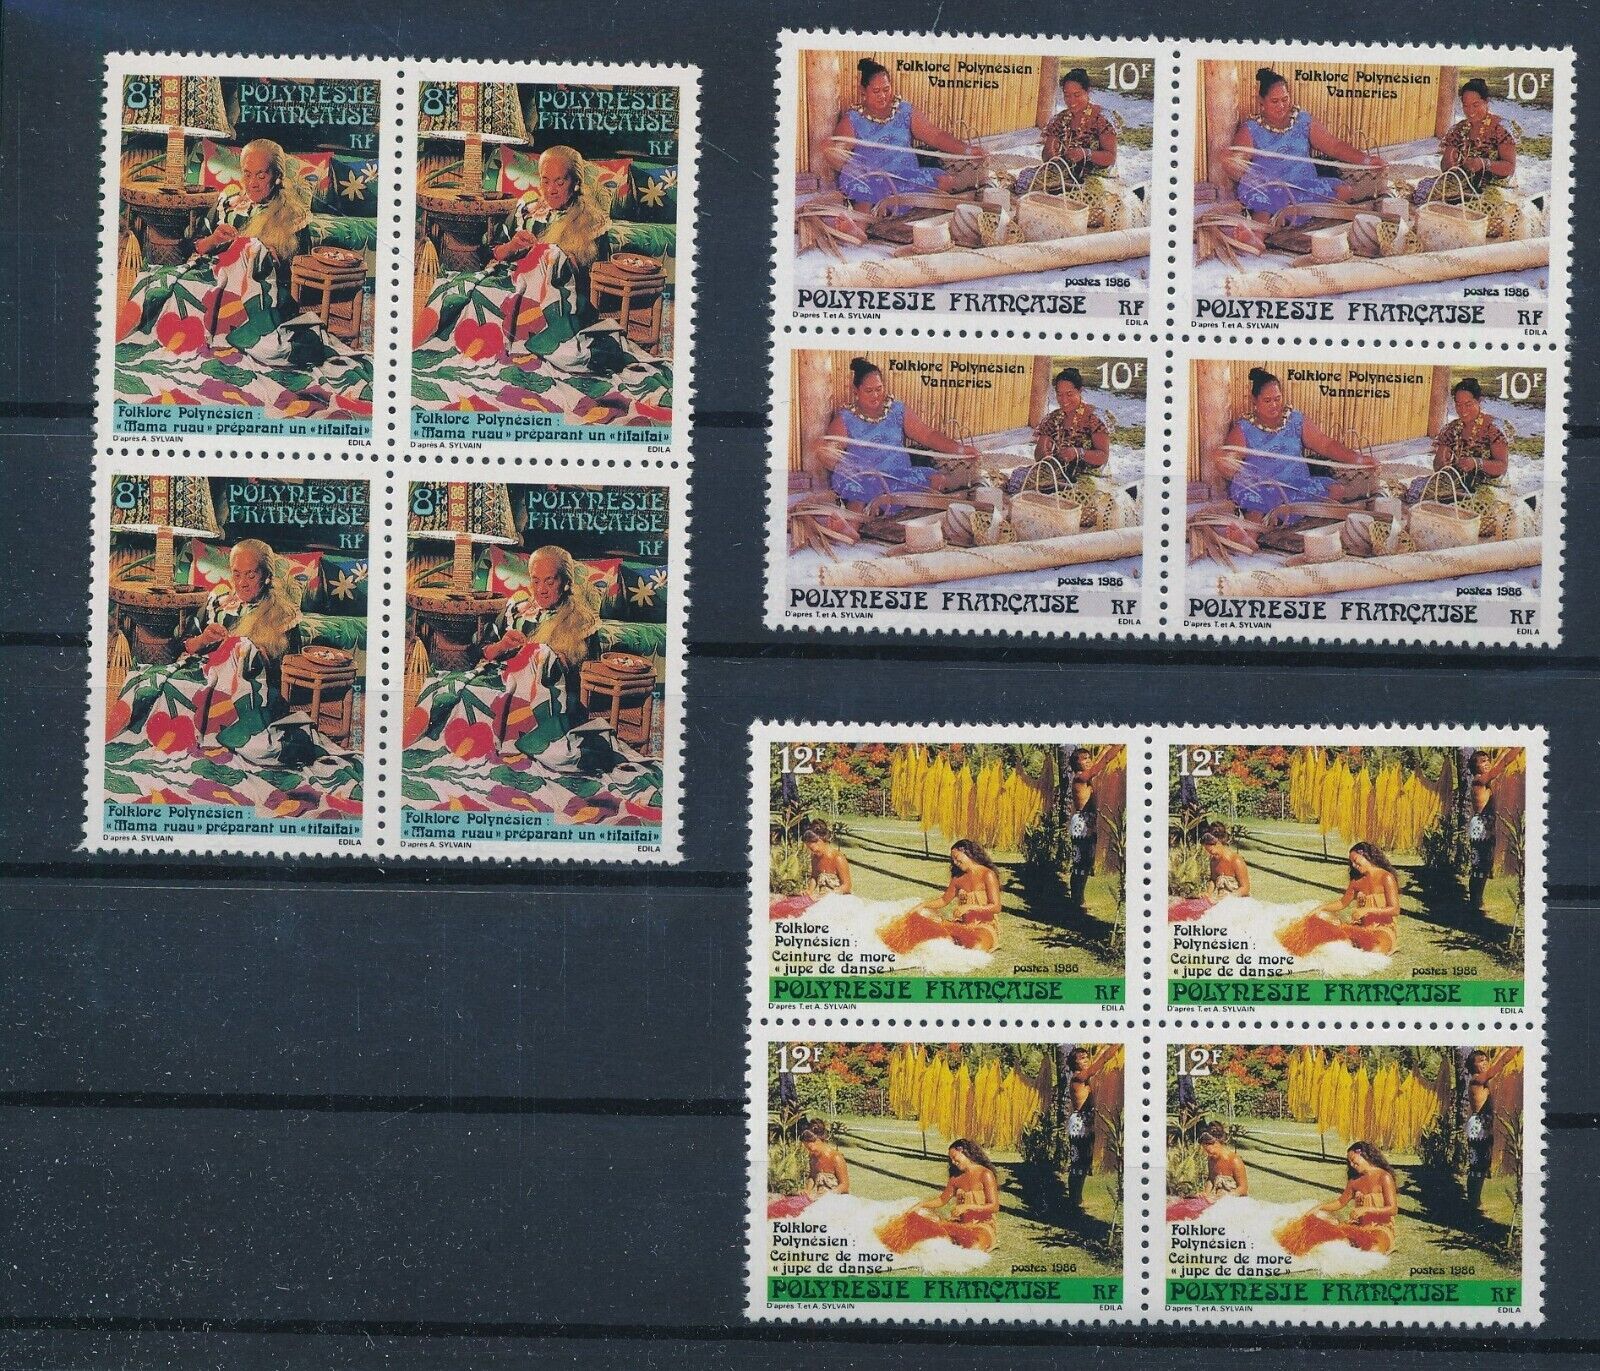 [BIN4378] French Polynesia 1986 good set in blocks of 4 stamps very fine MNH